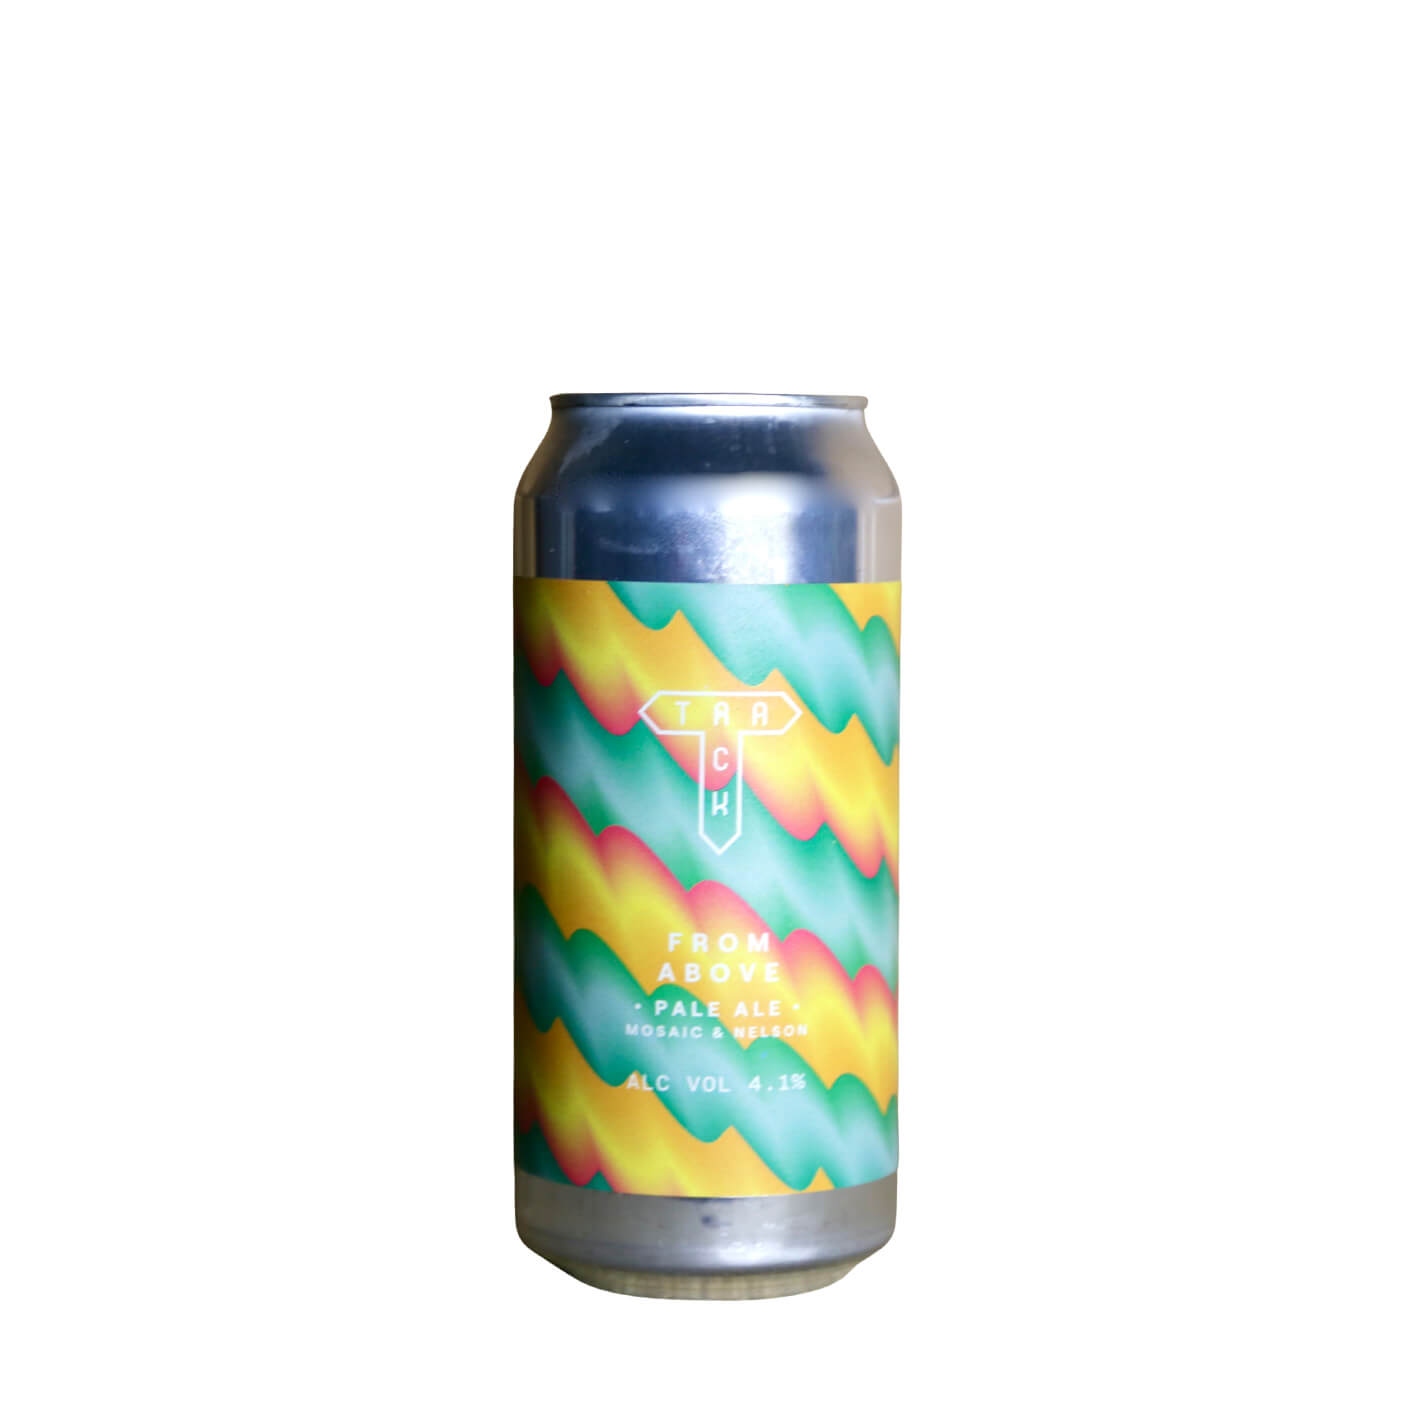 Track – From Above Pale Ale